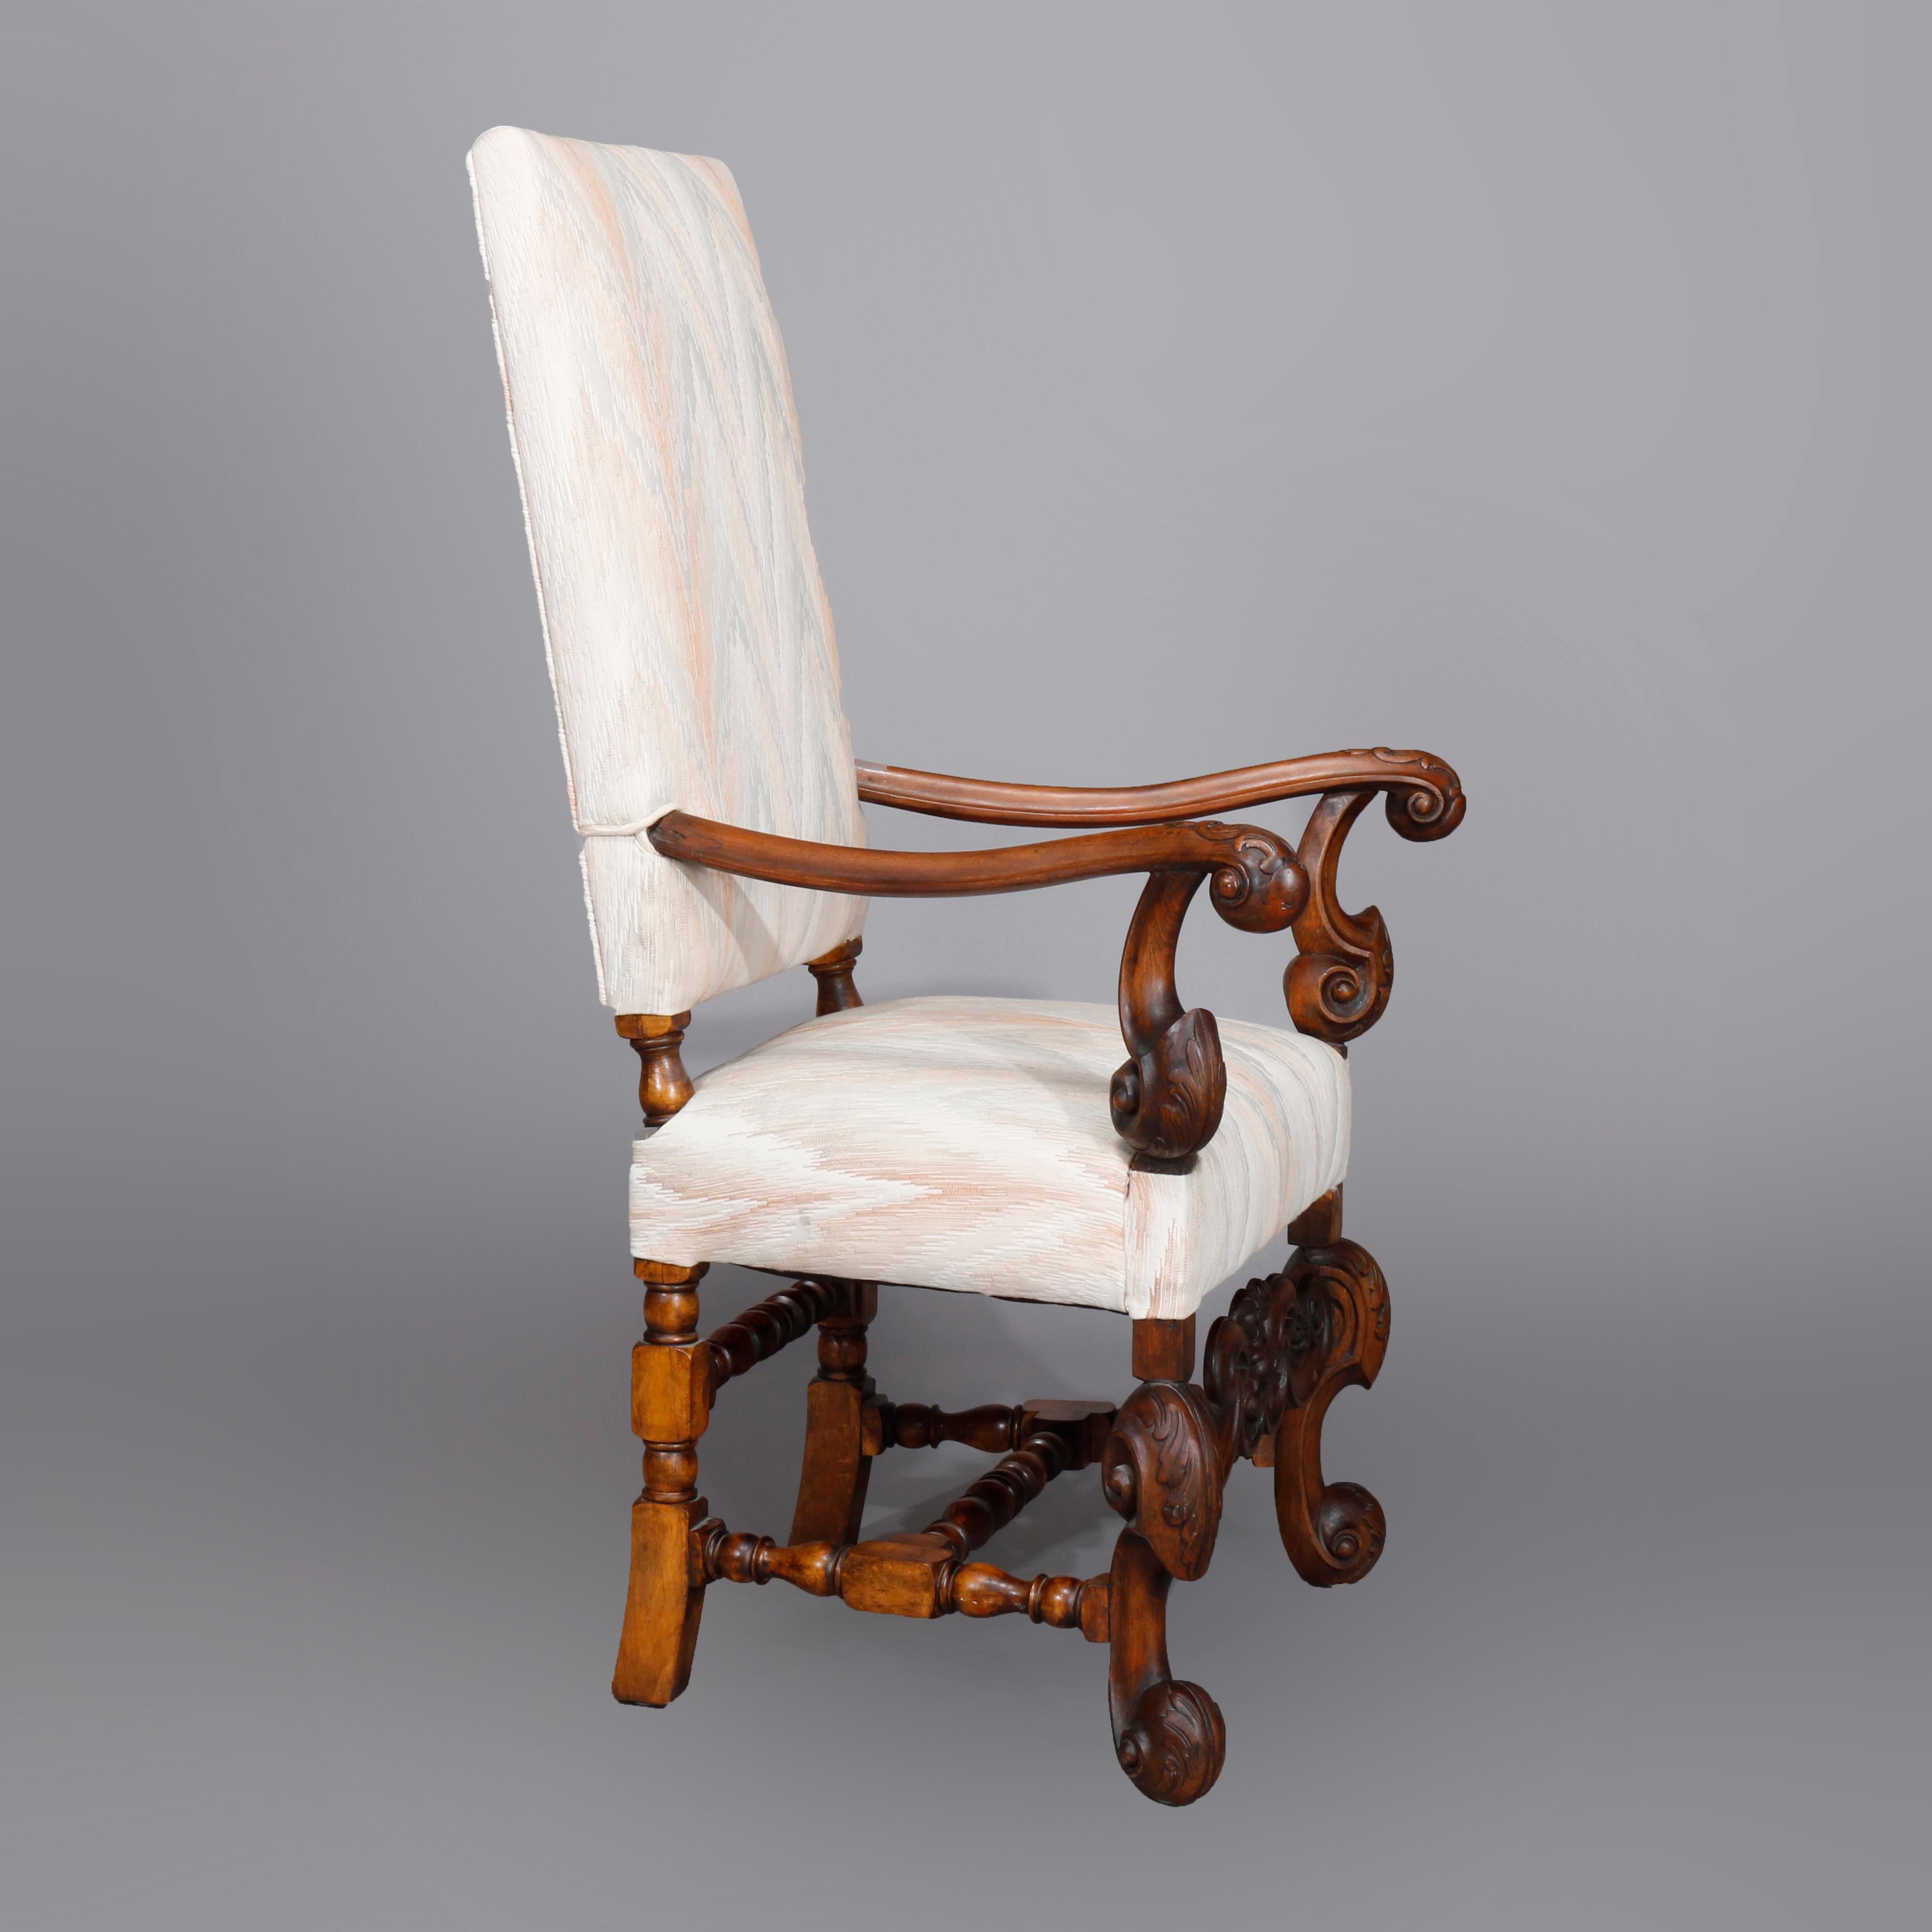 An antique pair of Continental Baroque tall fireside arm chairs offer upholstered high back and seat with carved walnut frame having scroll form flared arms, cabriole legs and stretcher, and newly upholstered, circa 1910.

Measures: 48.75